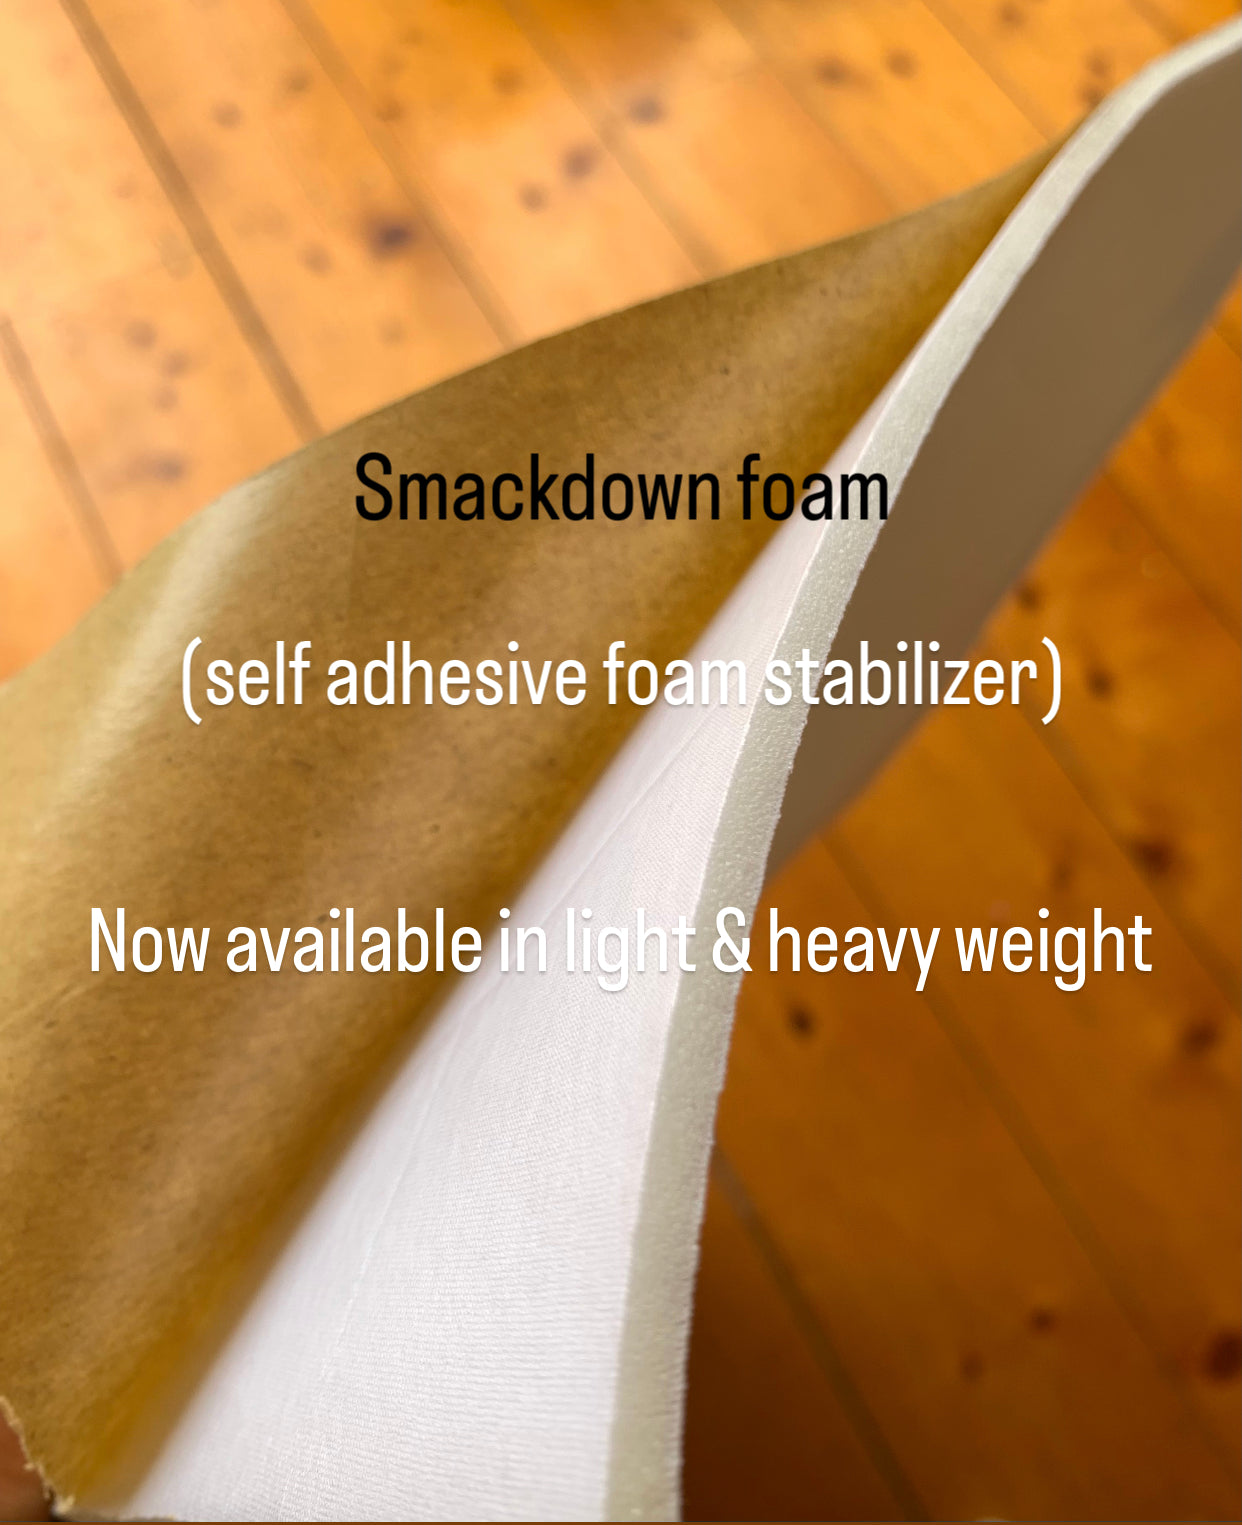 Smackdown foam stabilizer, Self-adhesive stabilizer, foam wadding, closed cell foam batting for bags, clothes, quilts, table runners, coasters